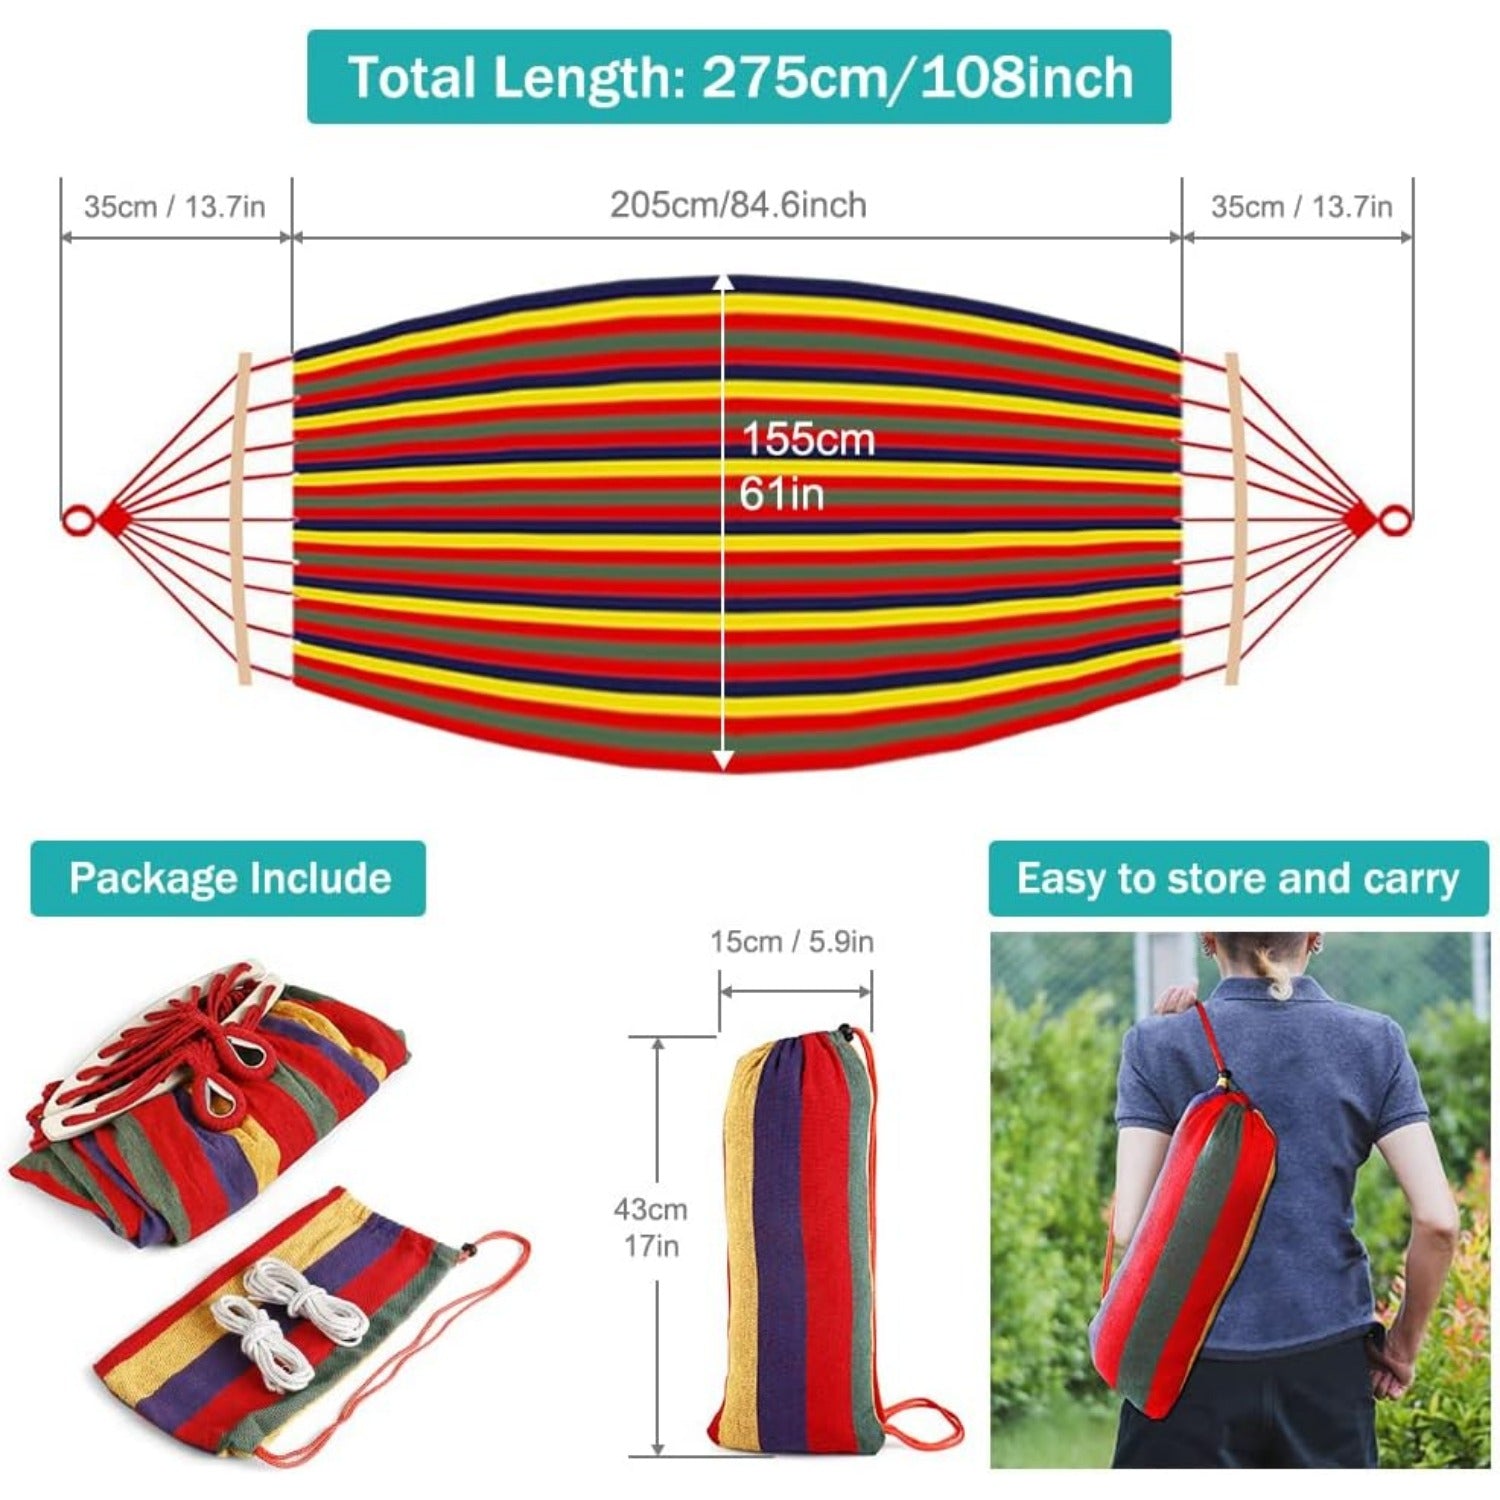 Camping Hammock 550lb Upgraded Thickened 320G Durable Canvas Fabric Single Hammocks with Two Anti Roll Balance Beam and Sturdy Metal Knot Tree Straps for Camping, Patio, Backyard, Outdoor